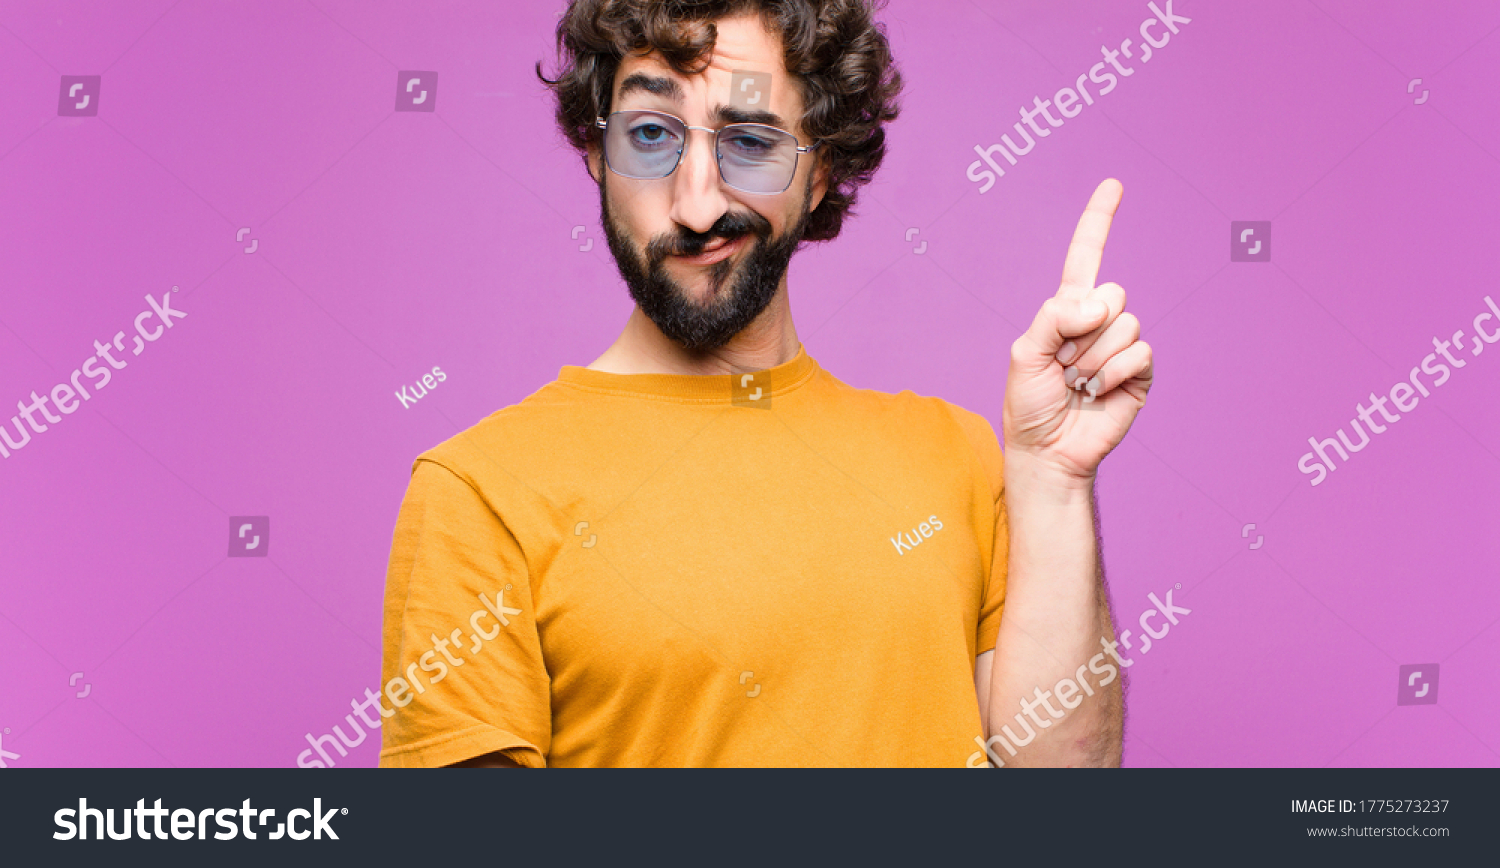 young crazy cool man feeling like a genius holding finger proudly up in the air after realizing a great idea, saying eureka against flat wall #1775273237